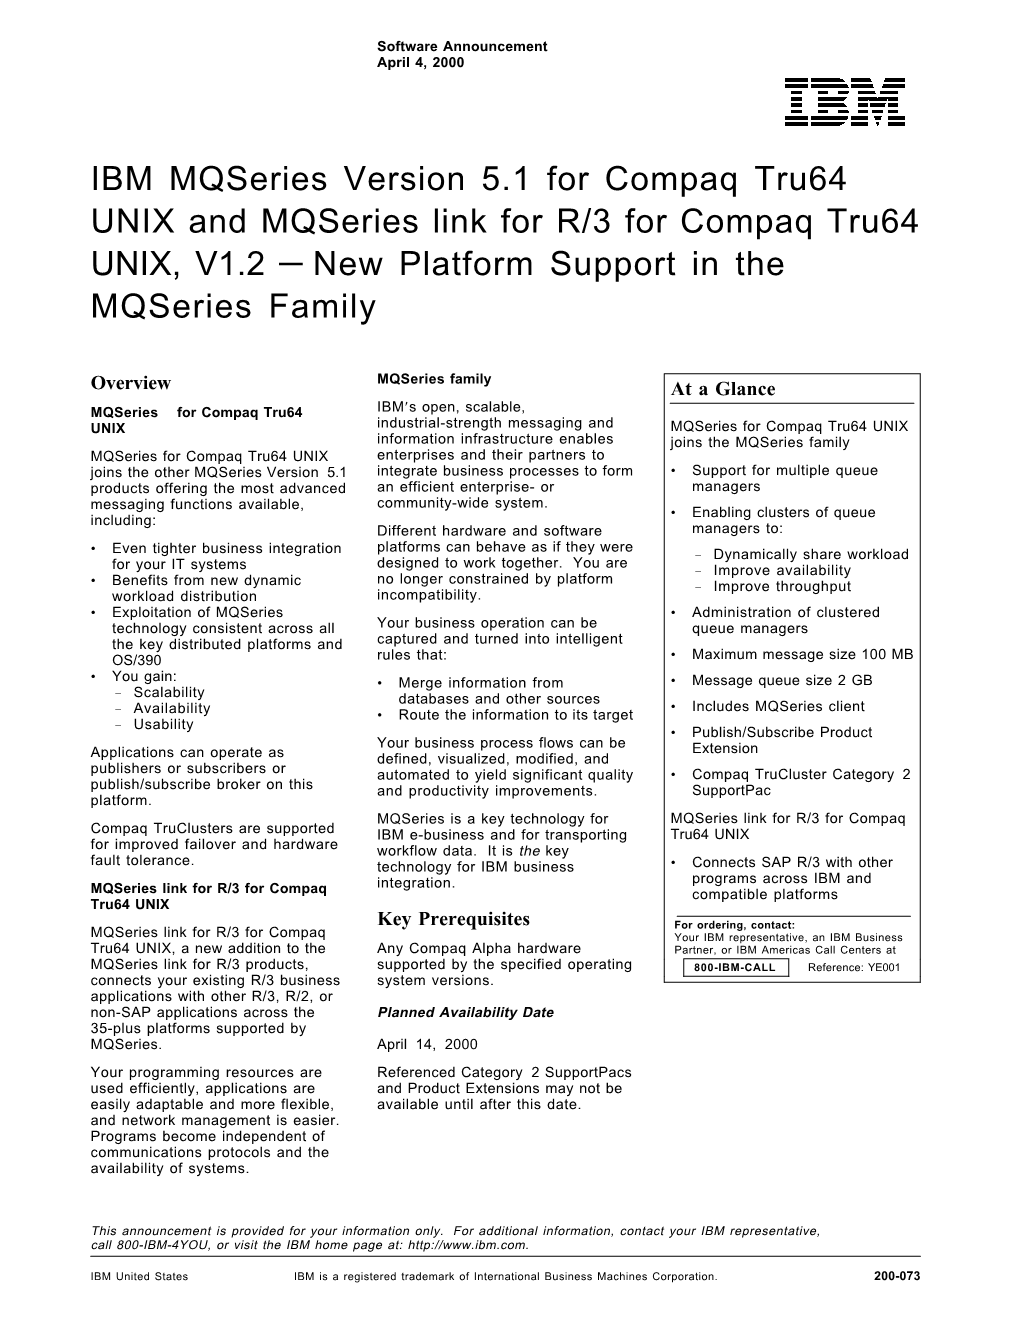 IBM Mqseries Version 5.1 for Compaq Tru64 UNIX and Mqseries Link for R/3 for Compaq Tru64 UNIX, V1.2 — New Platform Support in the Mqseries Family